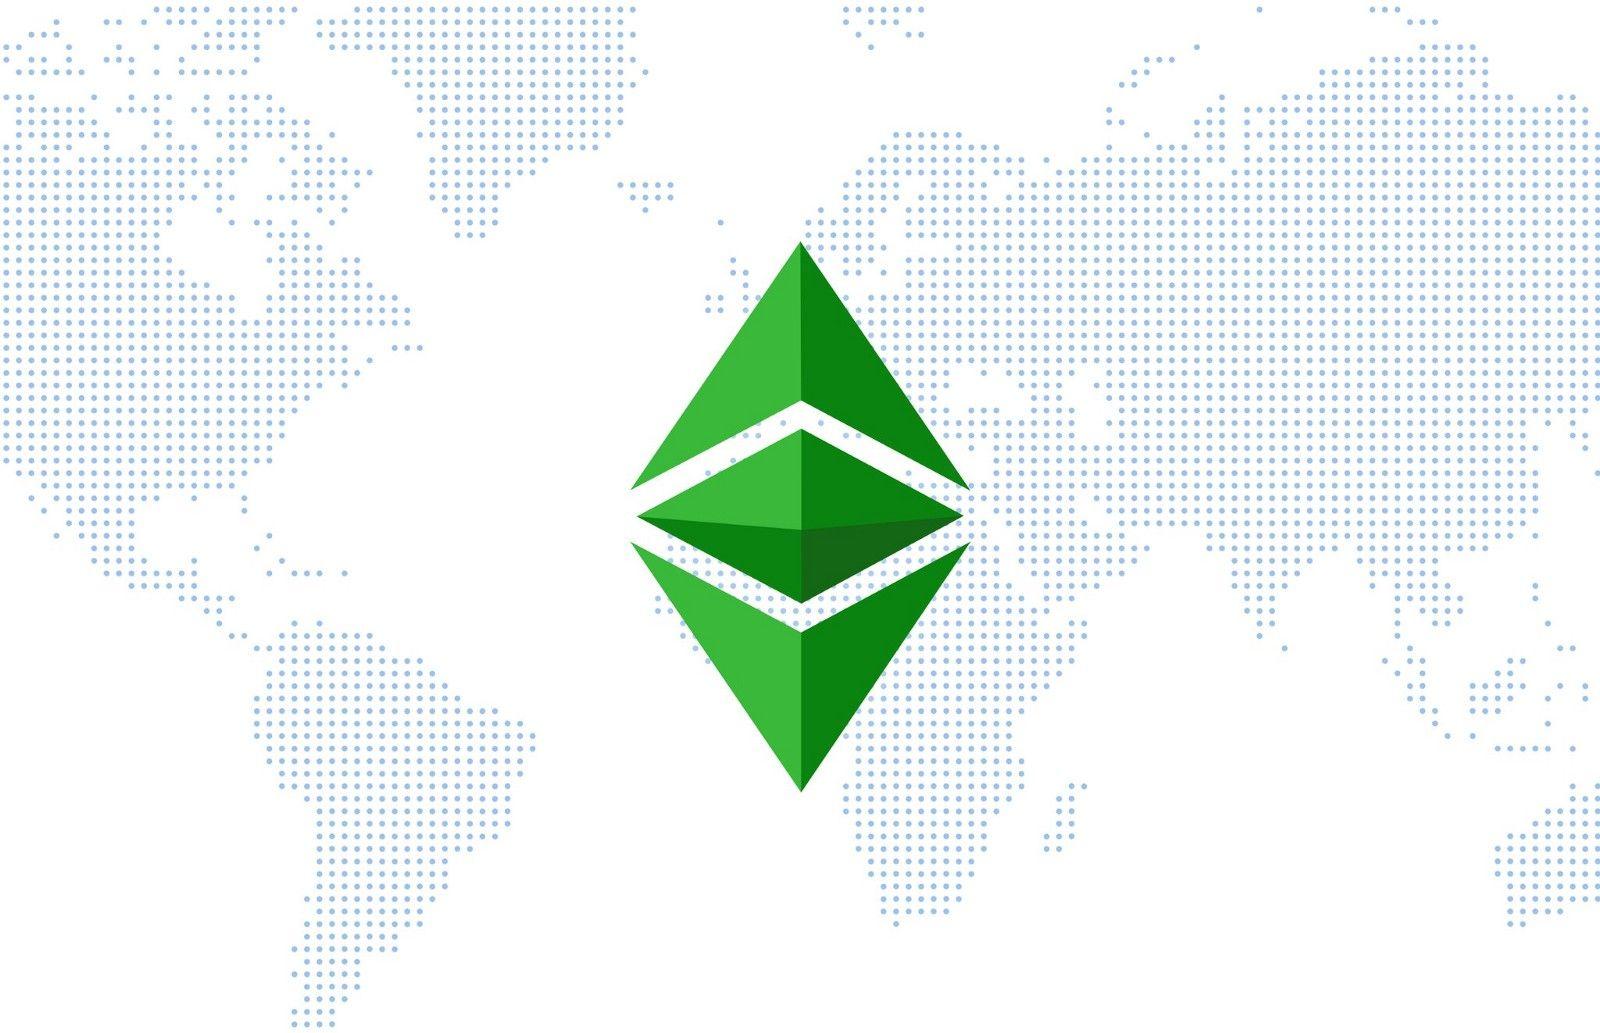 Sideways Green Triangle Logo - Buy and Sell Ethereum Classic on Coinbase Consumer